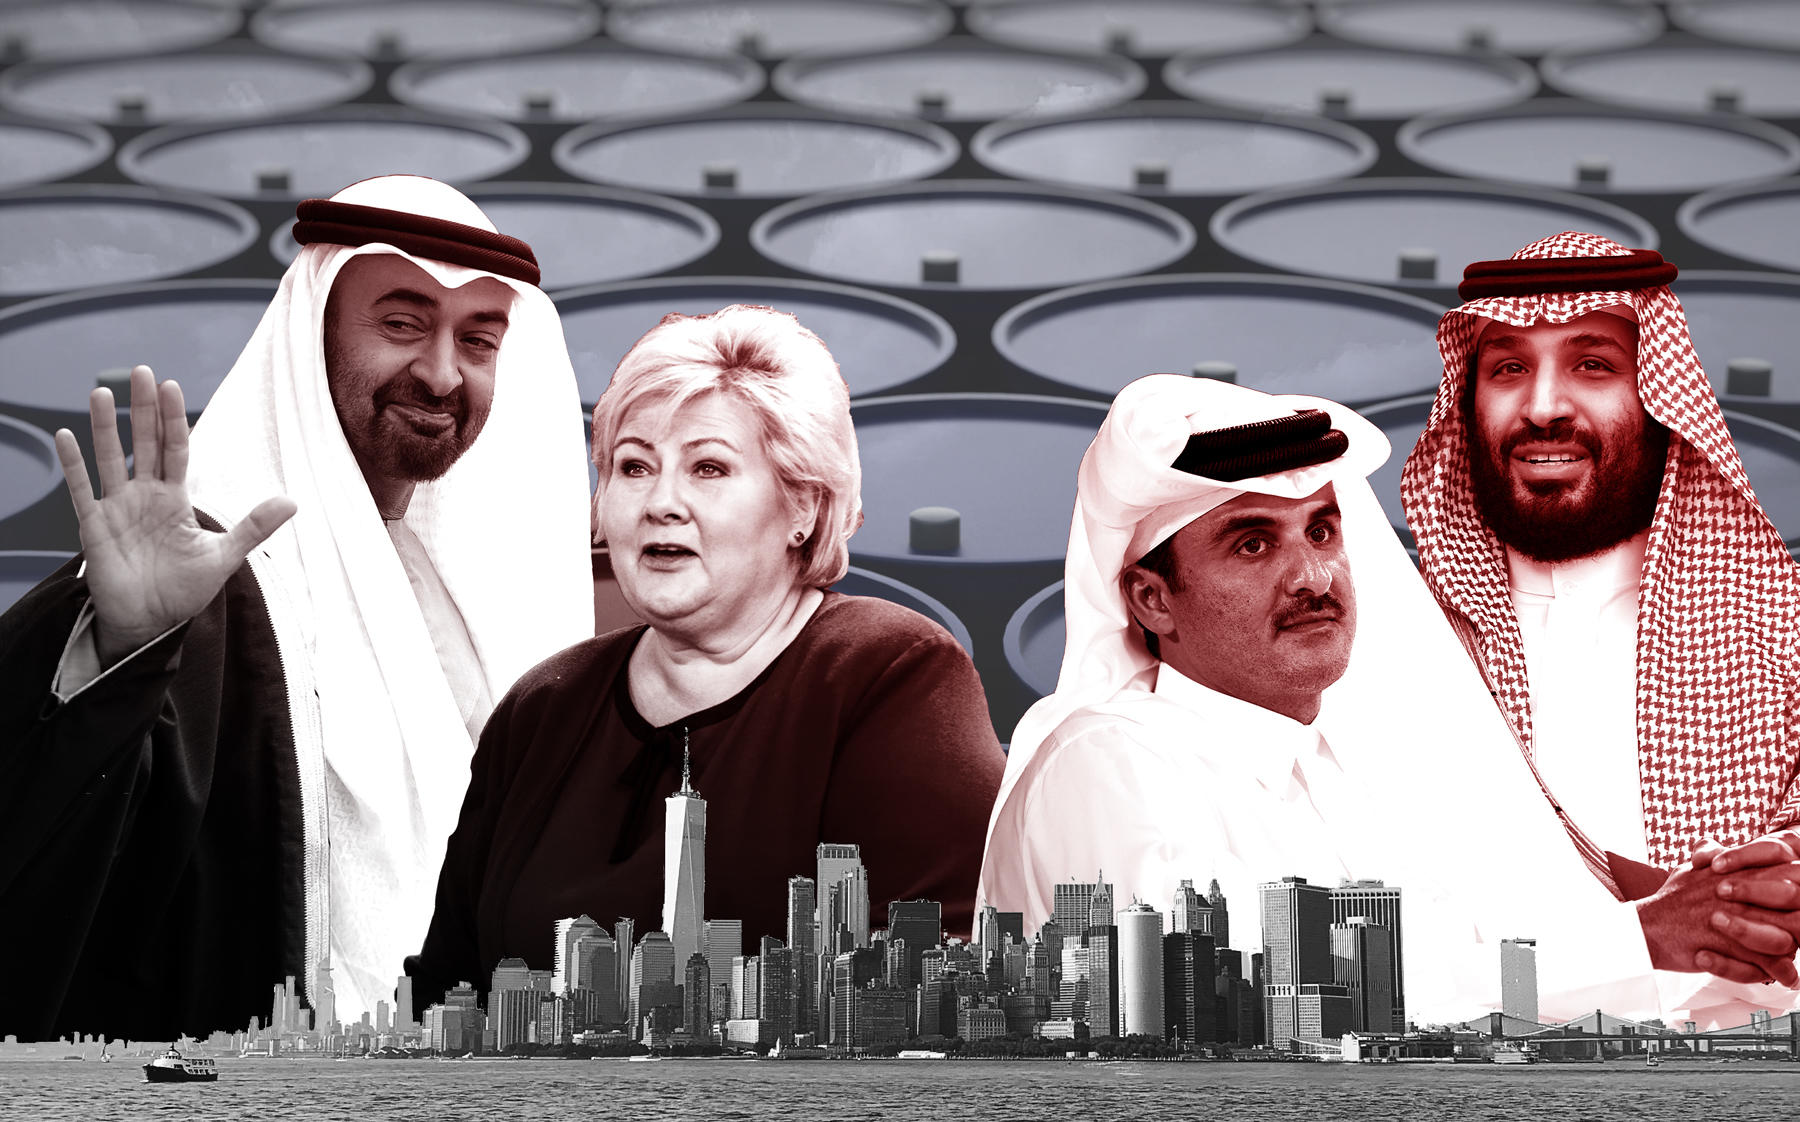 From left: Mohammad Bin Zayed, Erna Solberg, Tamim Bin Hamad Al Thani and Mohammad Bin Salman (Credit: liewig christian/Corbis; Christian Marquardt/NurPhoto; Quality Sport Images/Getty Images; MANDEL NGAN/AFP via Getty Images)